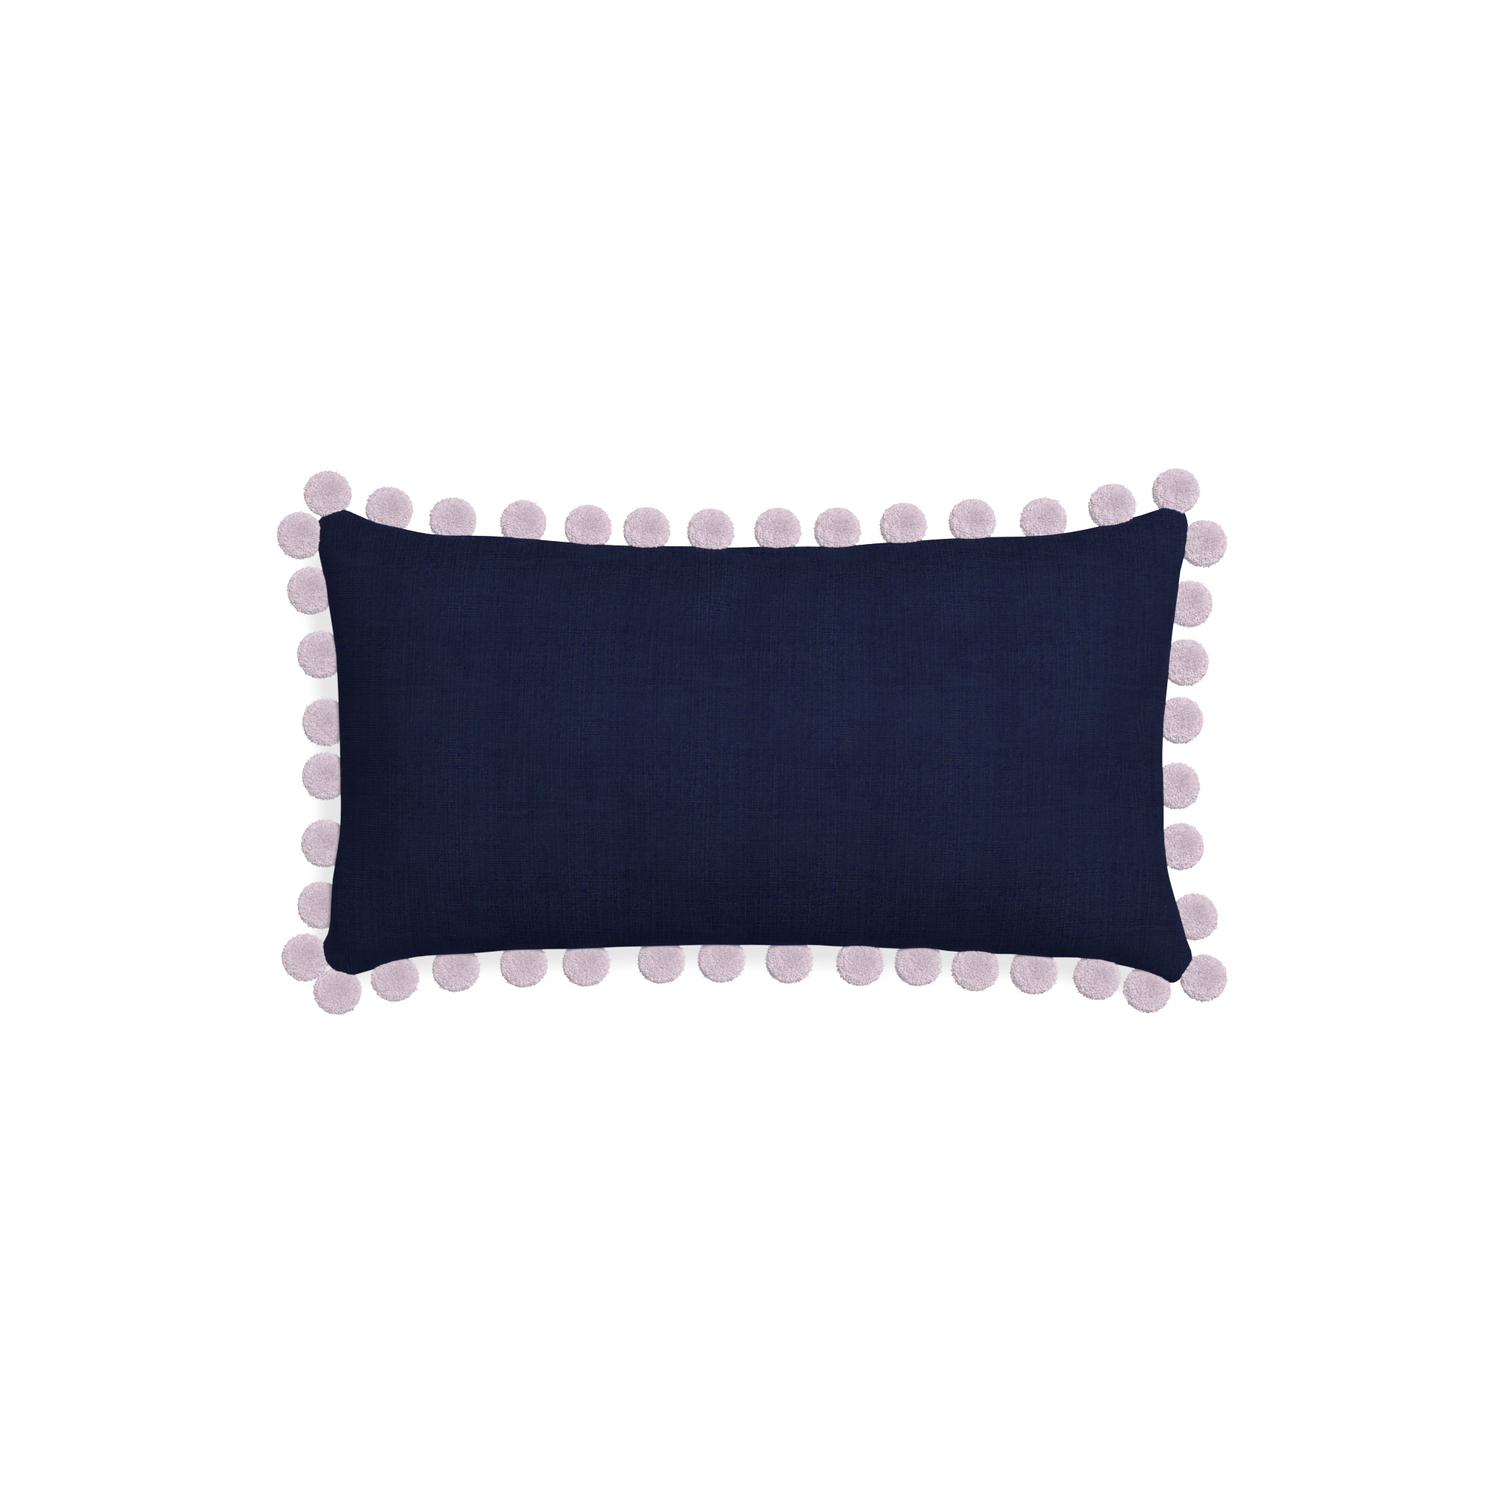 Petite-lumbar midnight custom navy bluepillow with l on white background